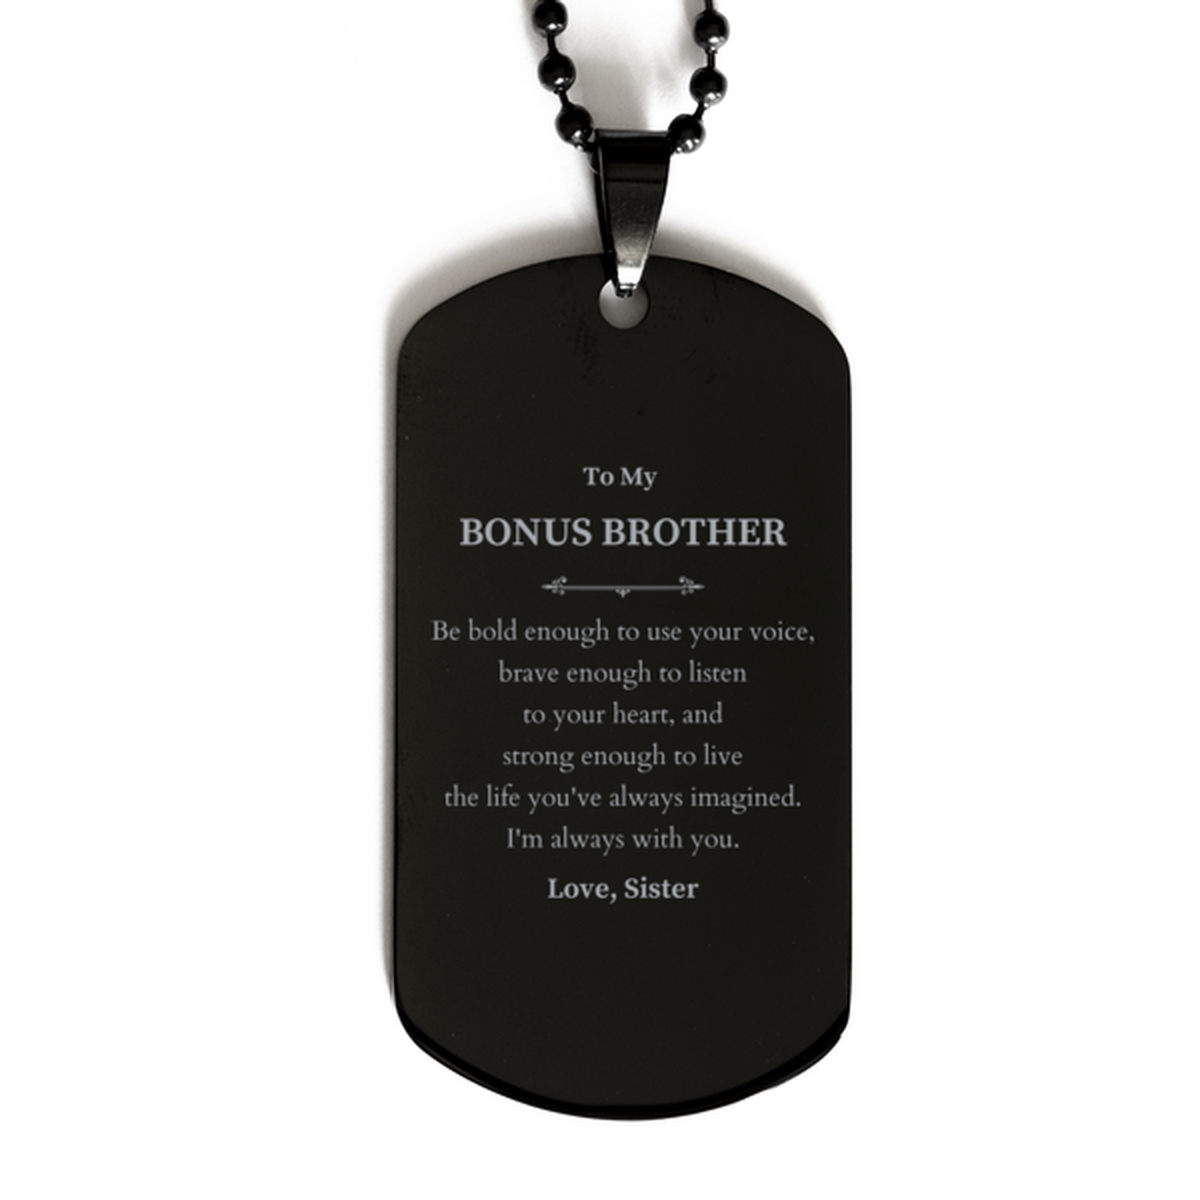 Keepsake Bonus Brother Black Dog Tag Gift Idea Graduation Christmas Birthday Bonus Brother from Sister, Bonus Brother Be bold enough to use your voice, brave enough to listen to your heart. Love, Sister